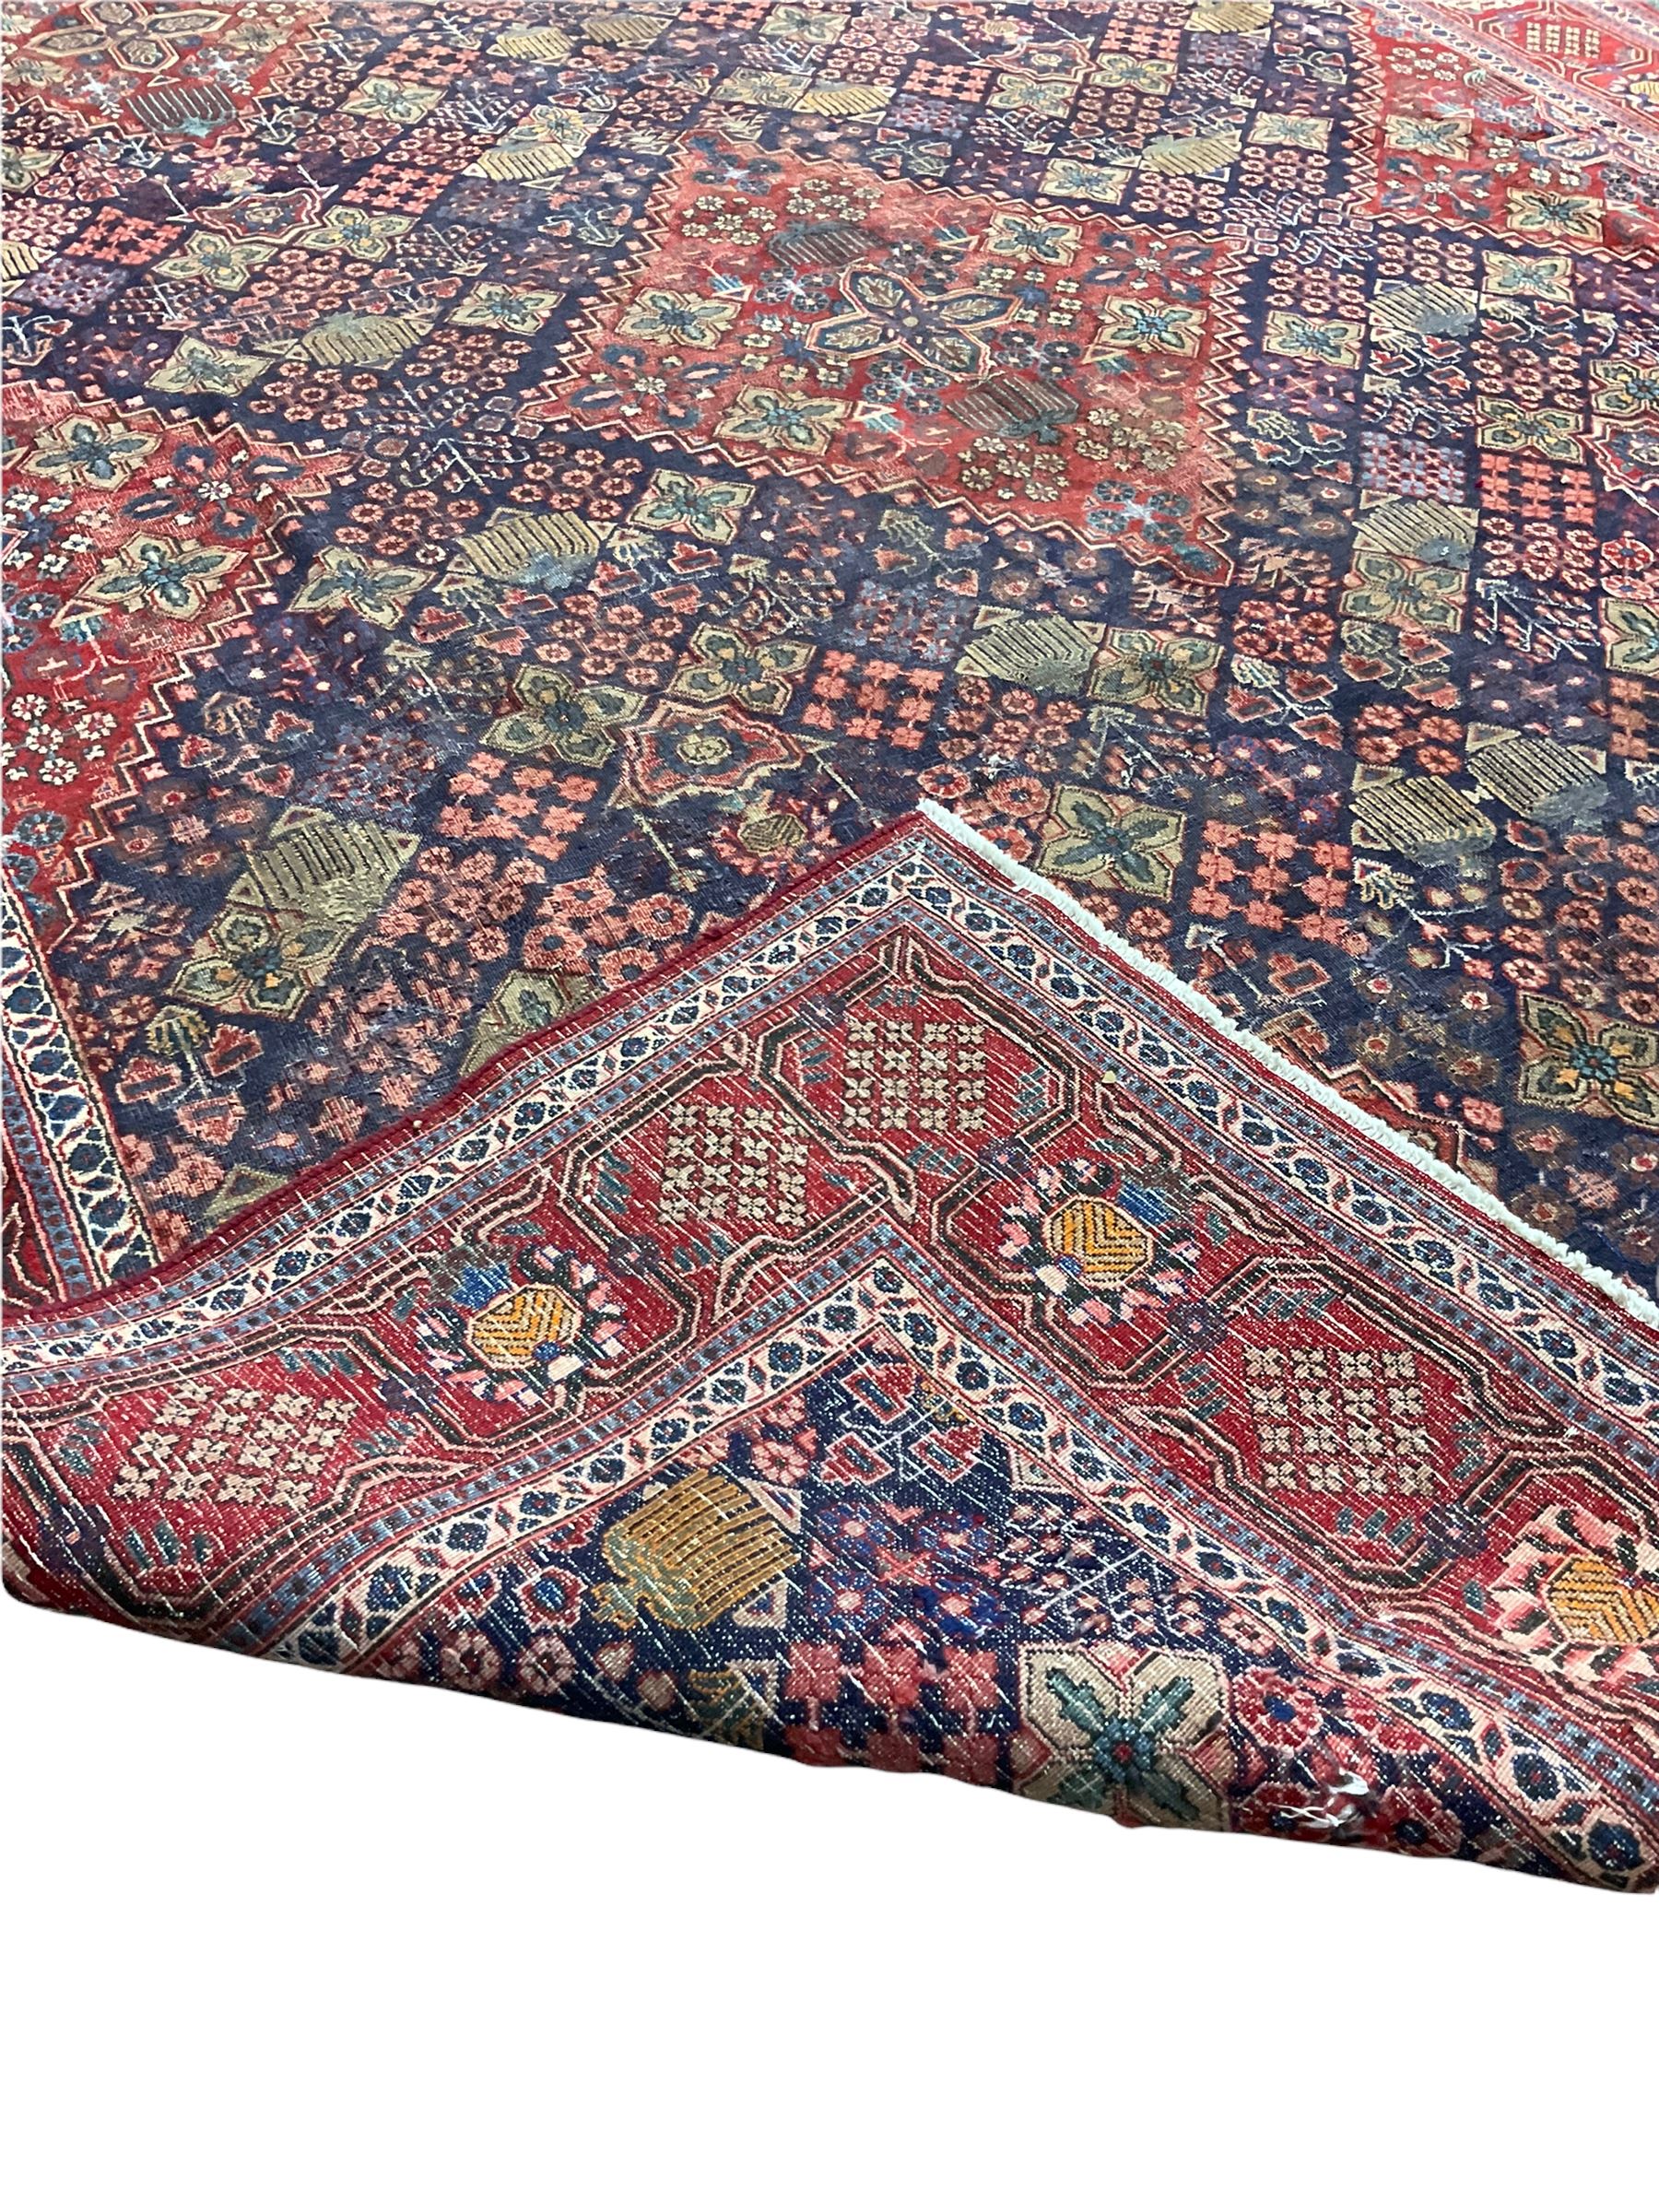 Handknotted Persian rug from Sanandaj region with five red medallions - Image 3 of 7